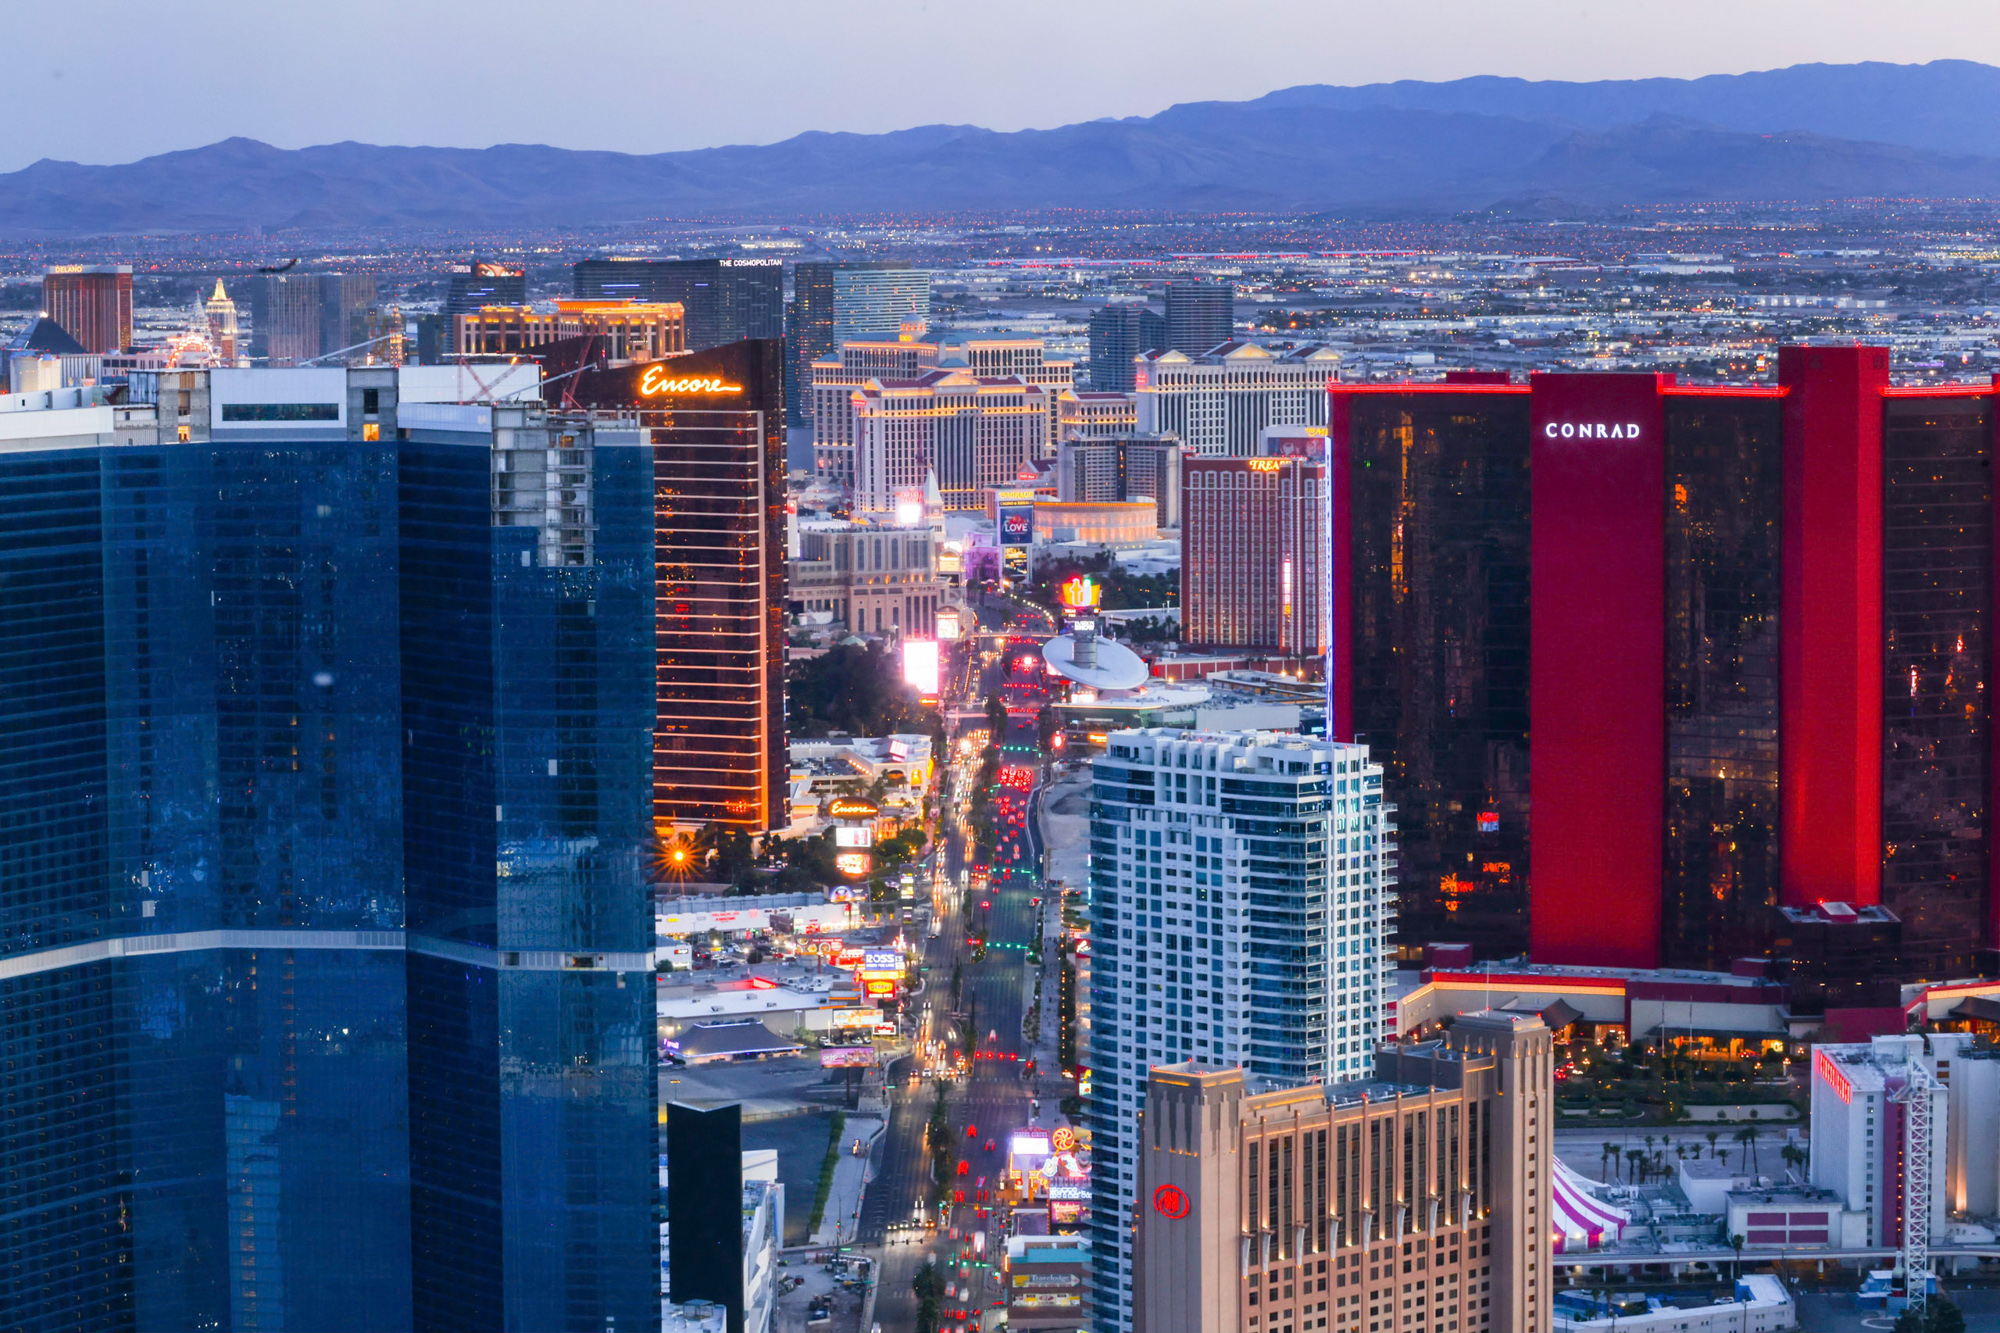 Nevada casinos' take of $1.23 billion in May shatters nearly 14